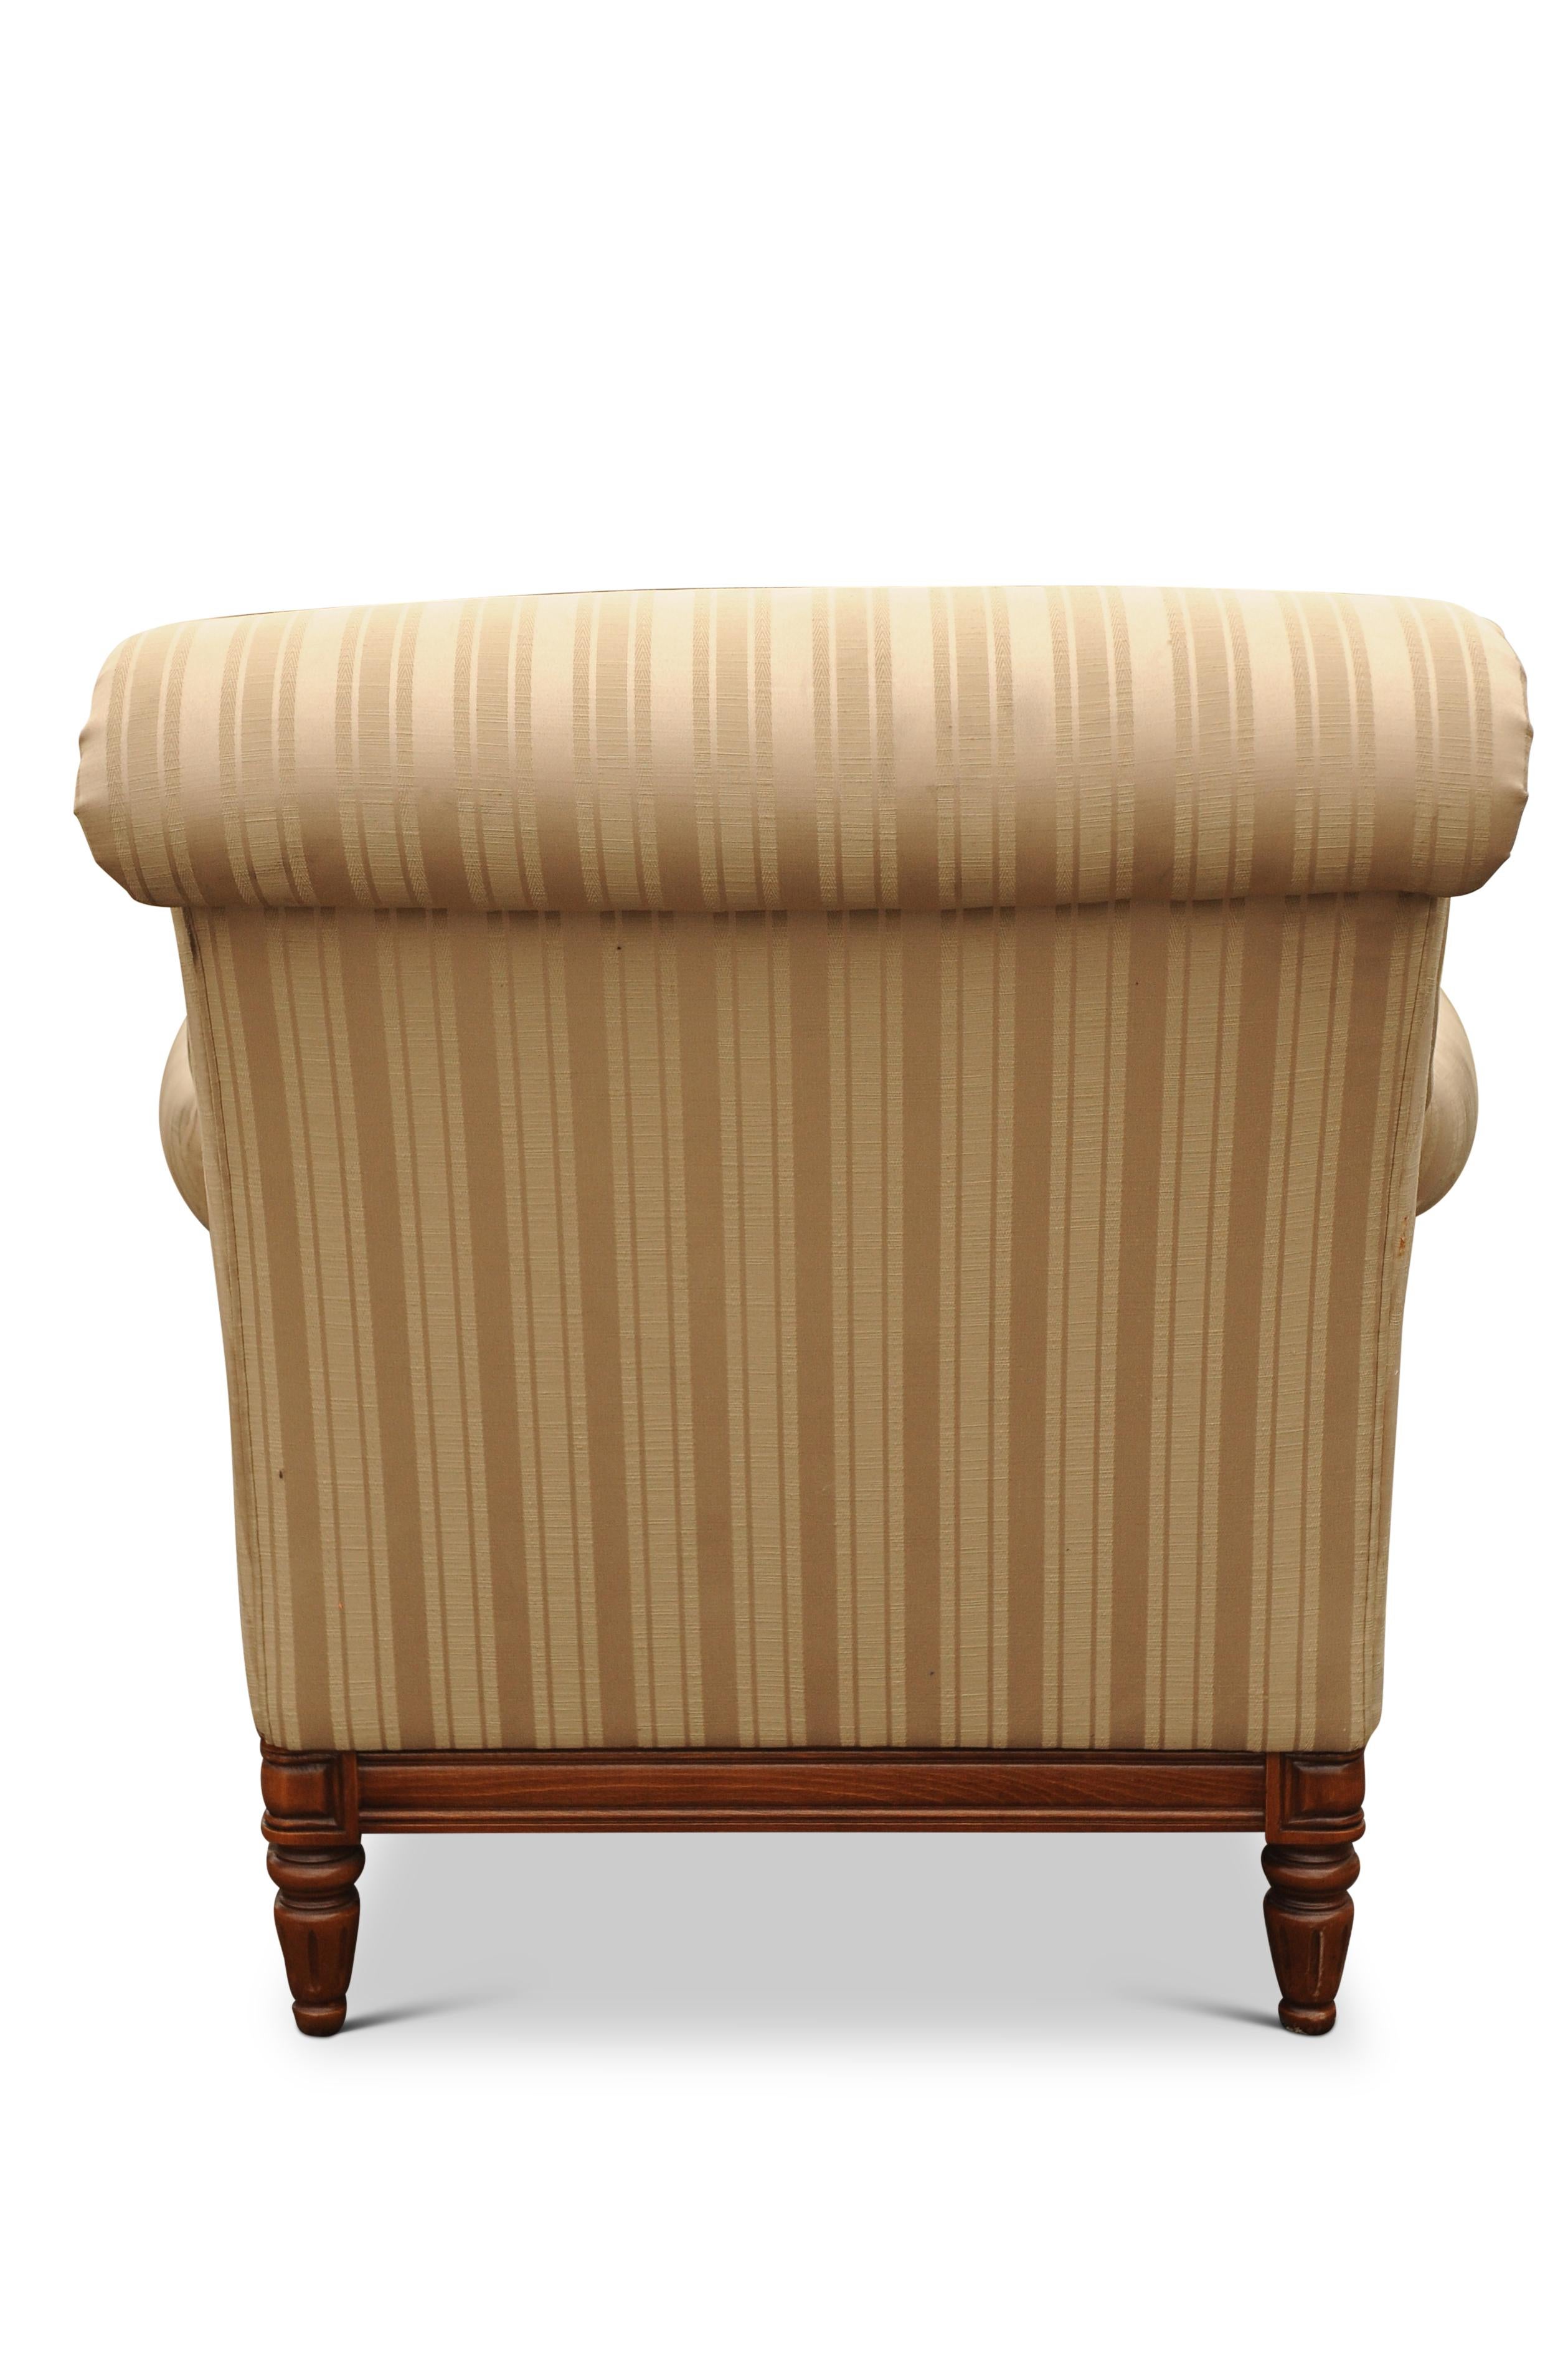 A William IV Empire Design Library Armchair Striped Cream Silk Upholstery For Sale 2